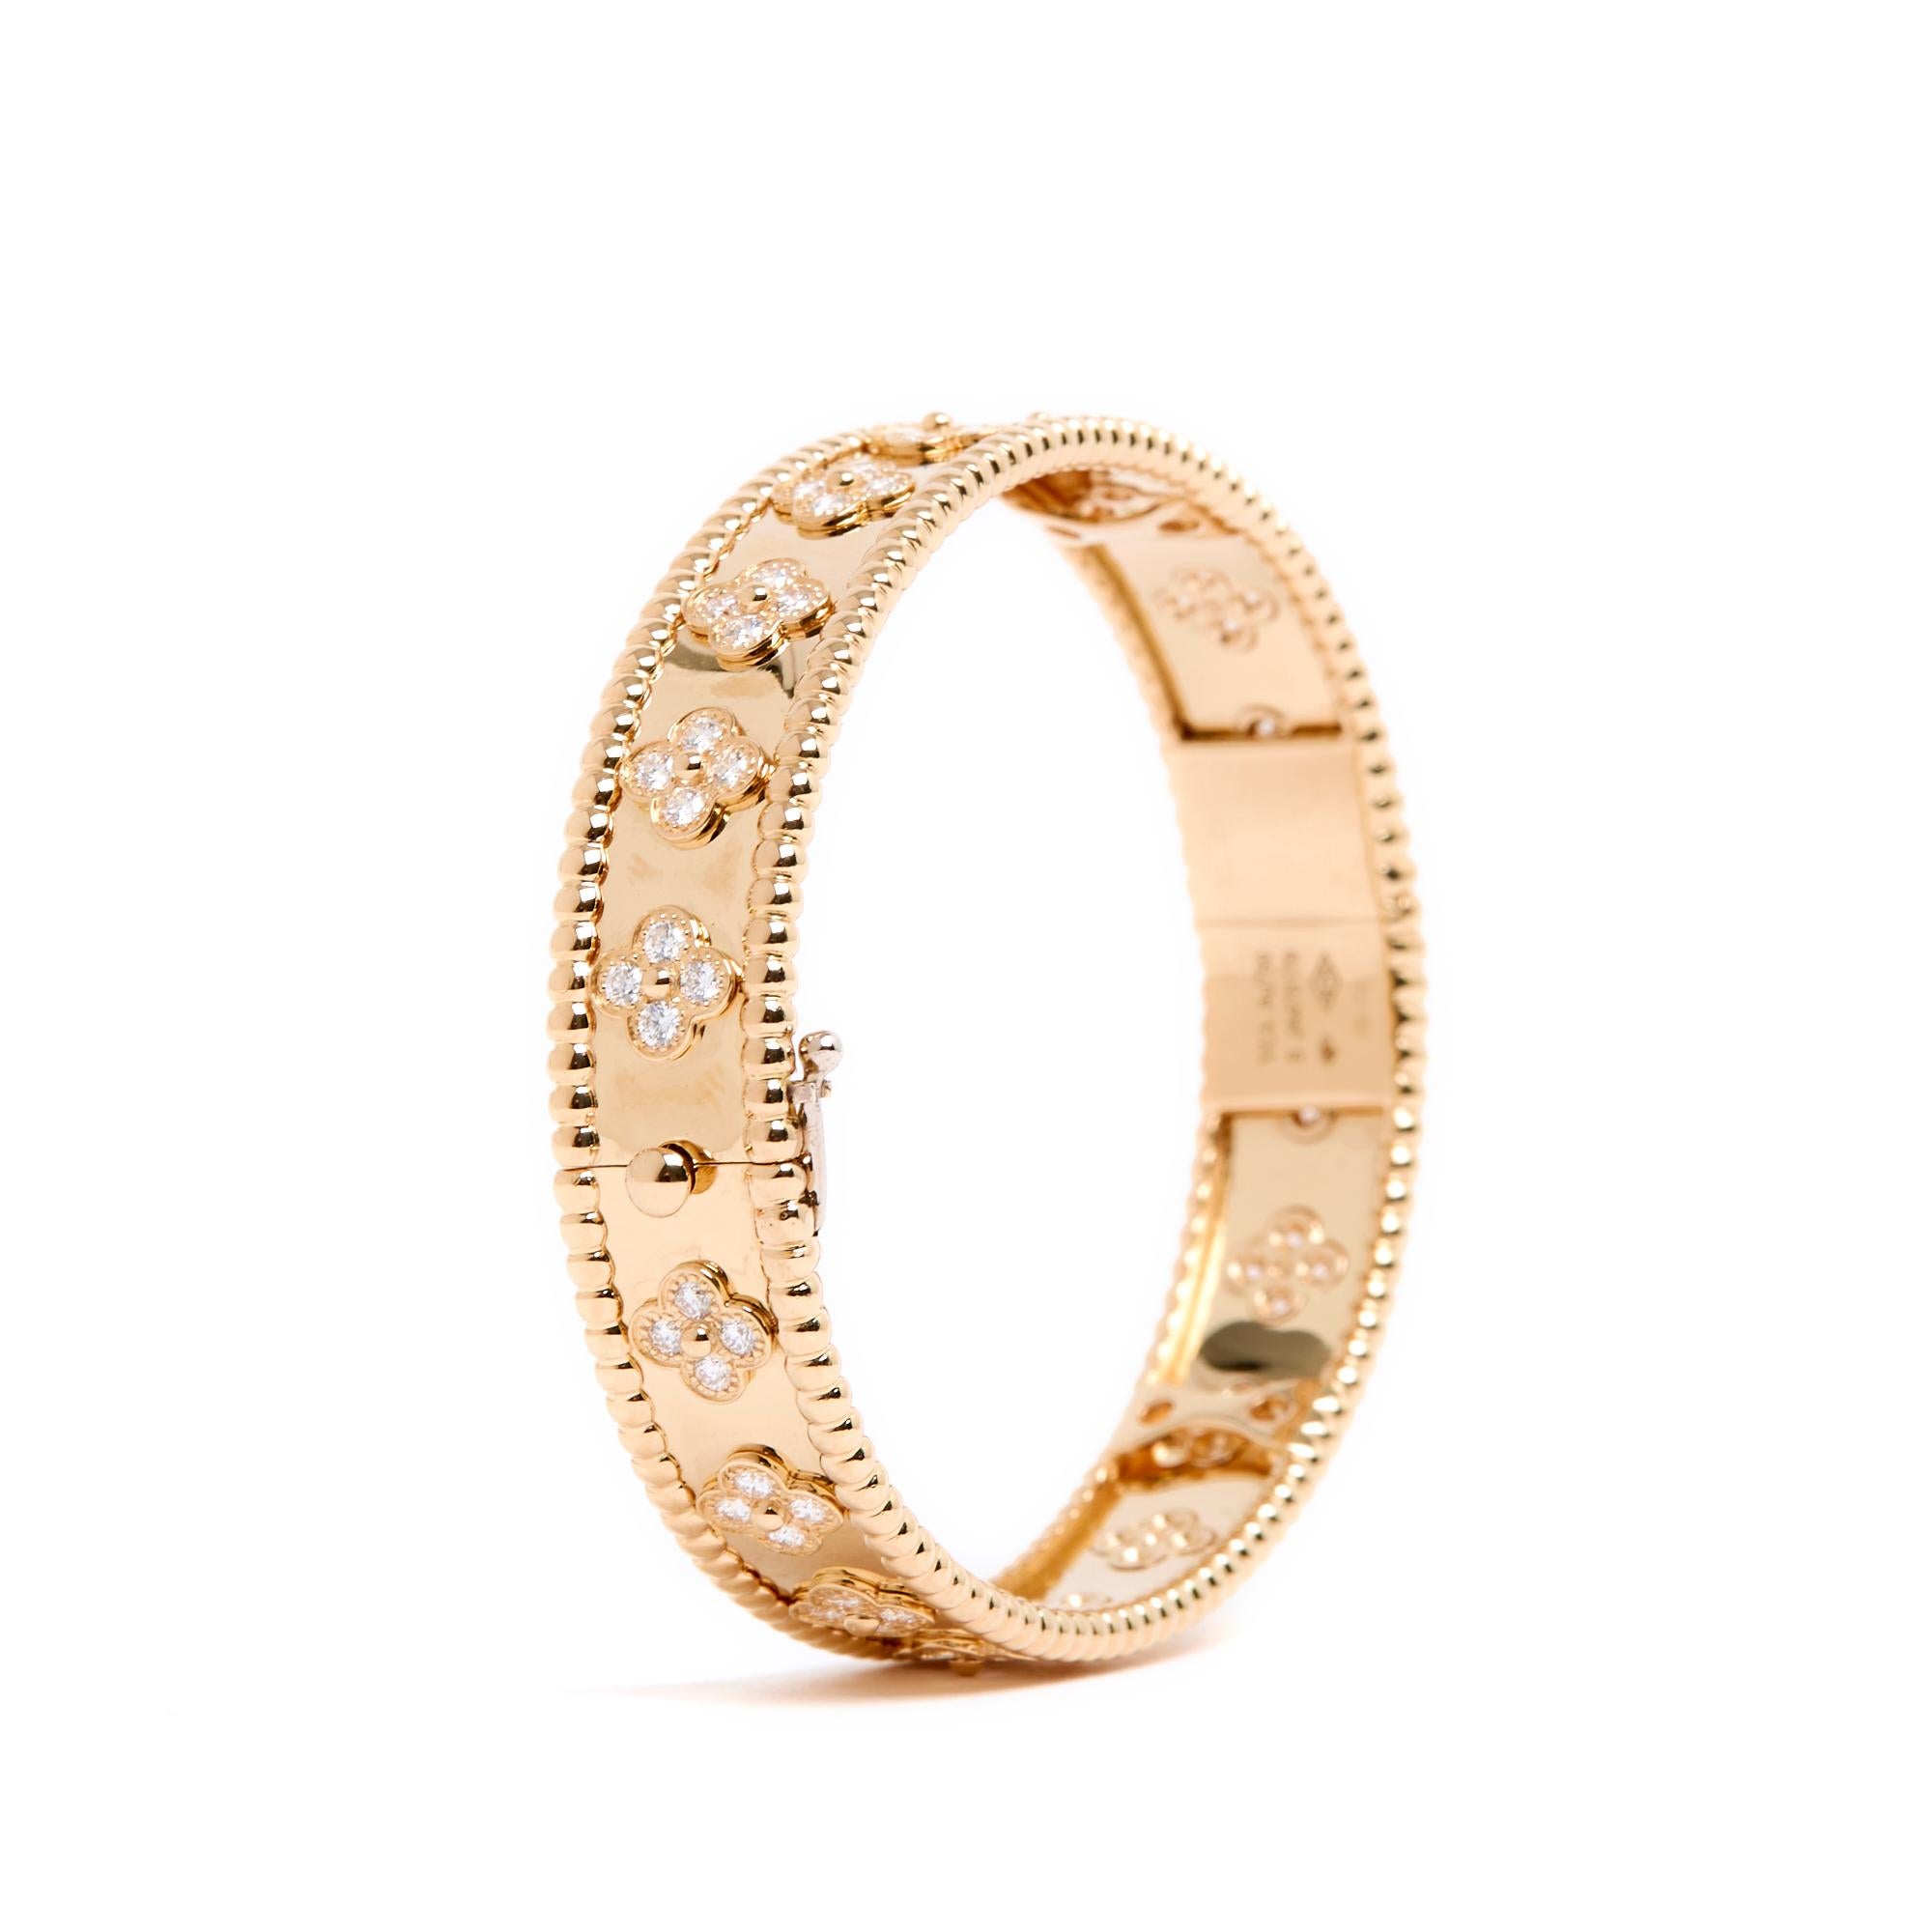 Van Cleef & Arpels Perlée Trèfles (or Alhambra) bracelet, medium model, in yellow gold and diamonds (80 in total for 1.78 carats), invisible ratchet clasp also in yellow gold. Size S for a wrist of 16 cm, bracelet width 1.1 cm. The bracelet comes